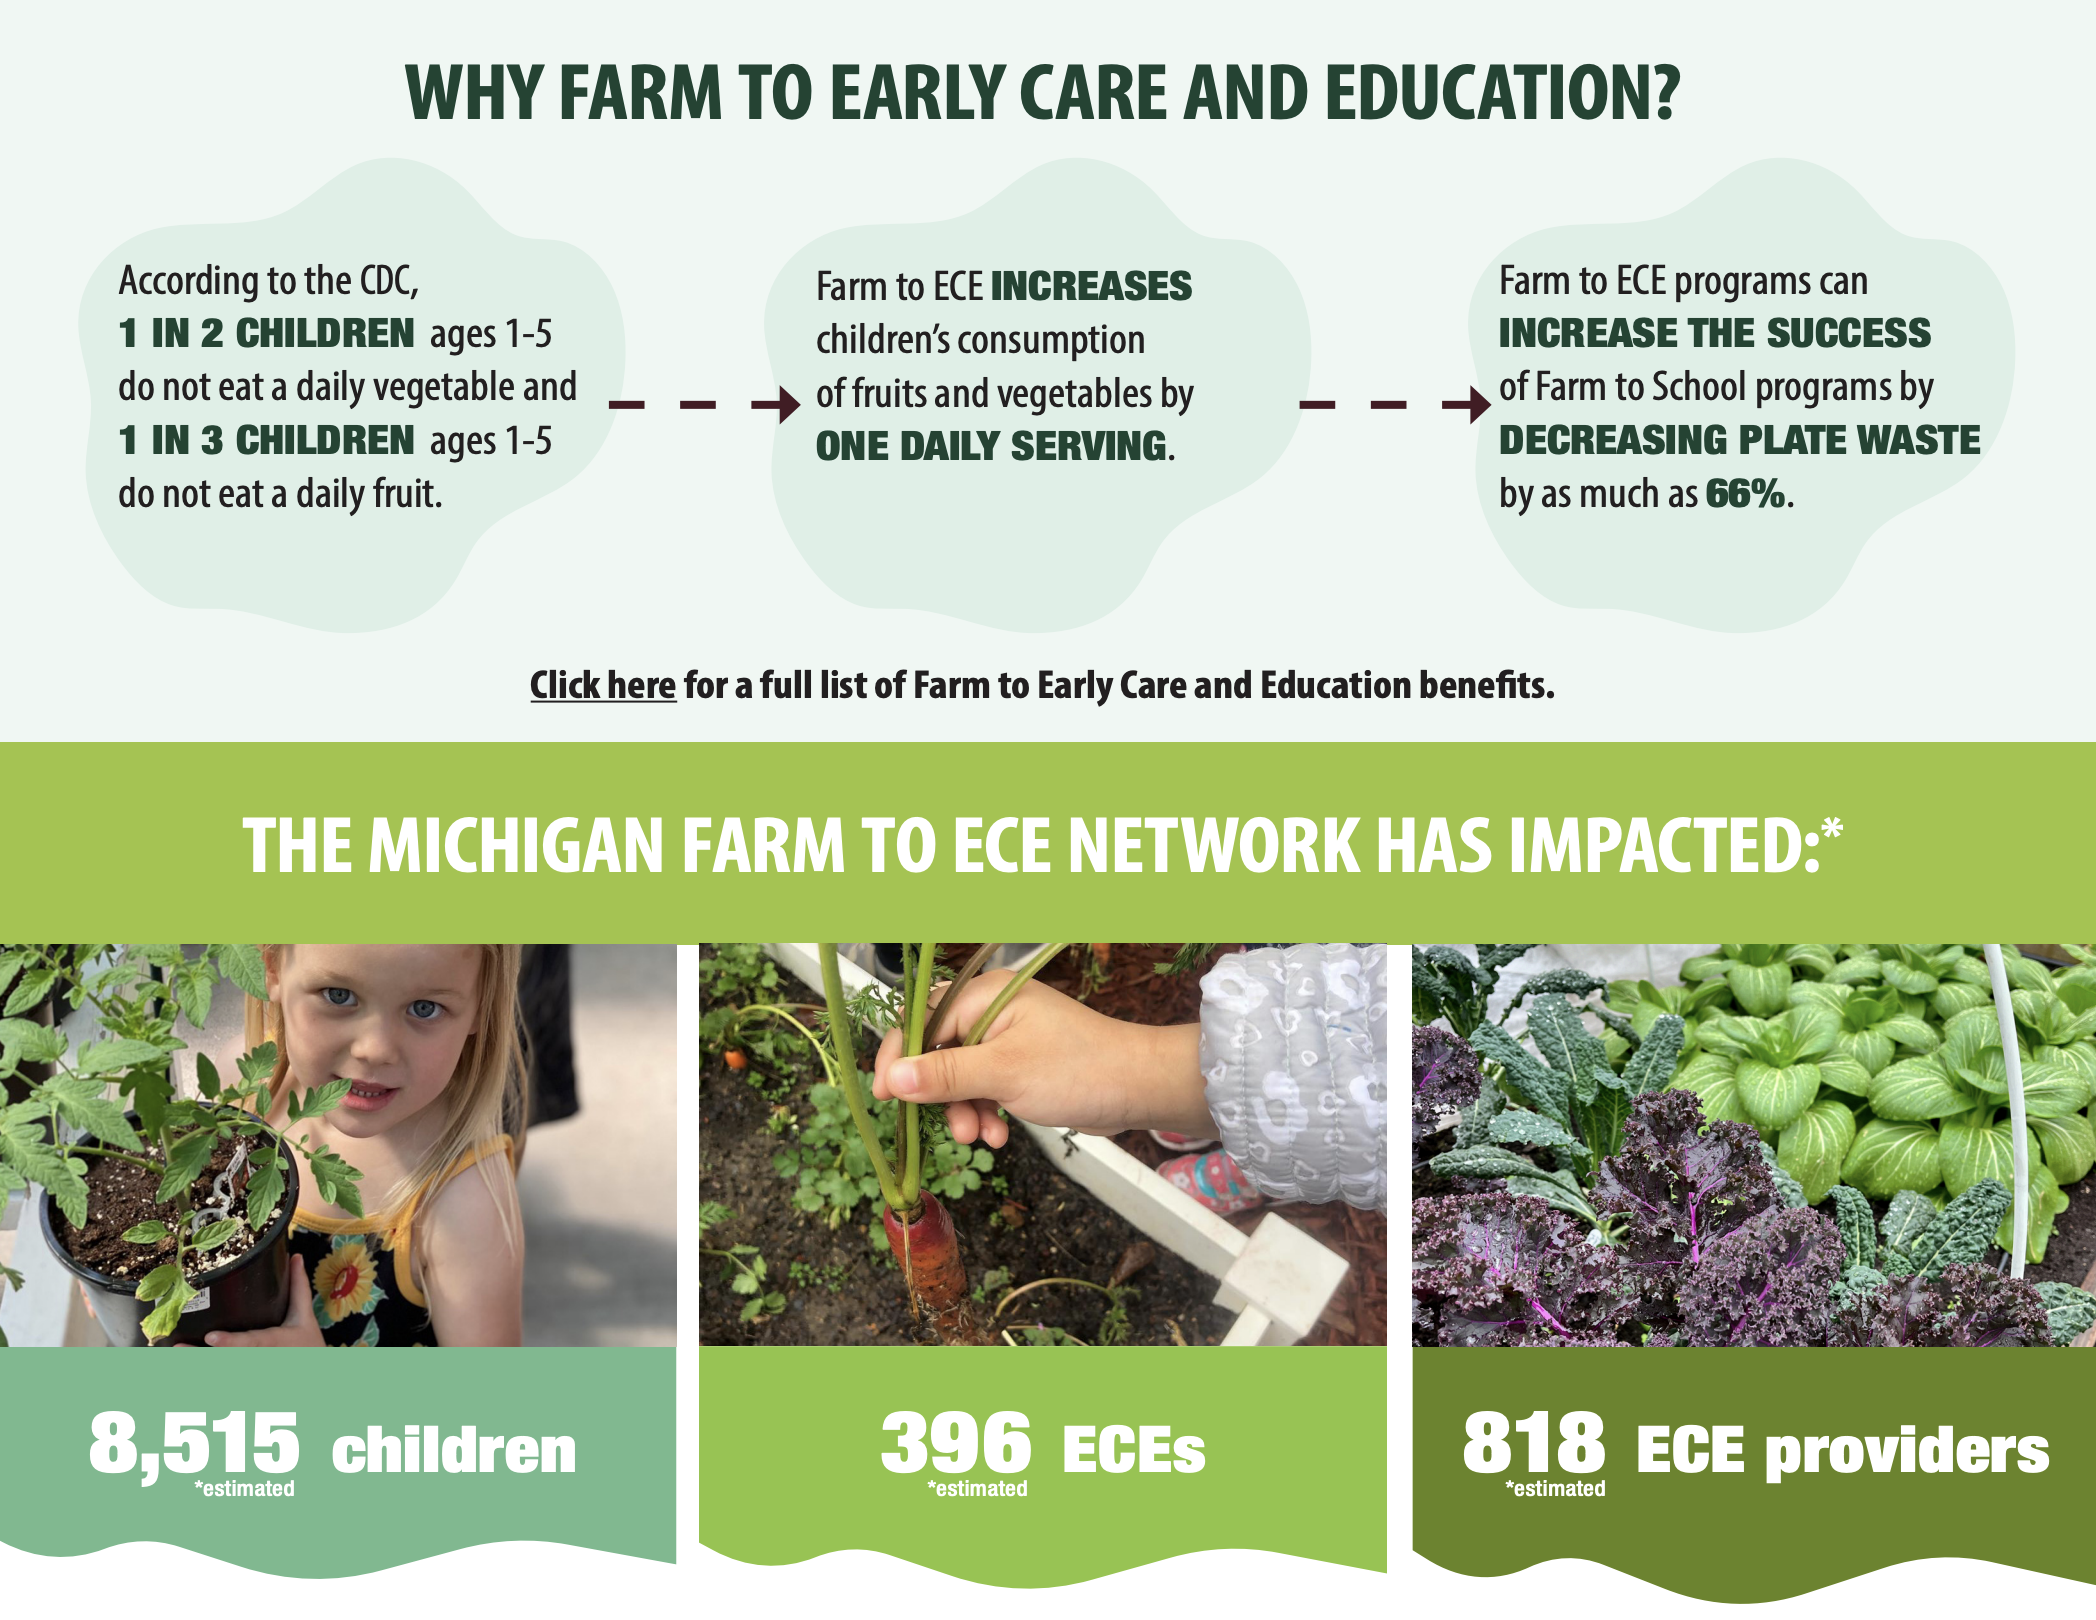 The Michigan Farm to ECE Network has impacted 8515 children, 396 ECEs, and  818 ECE providers.